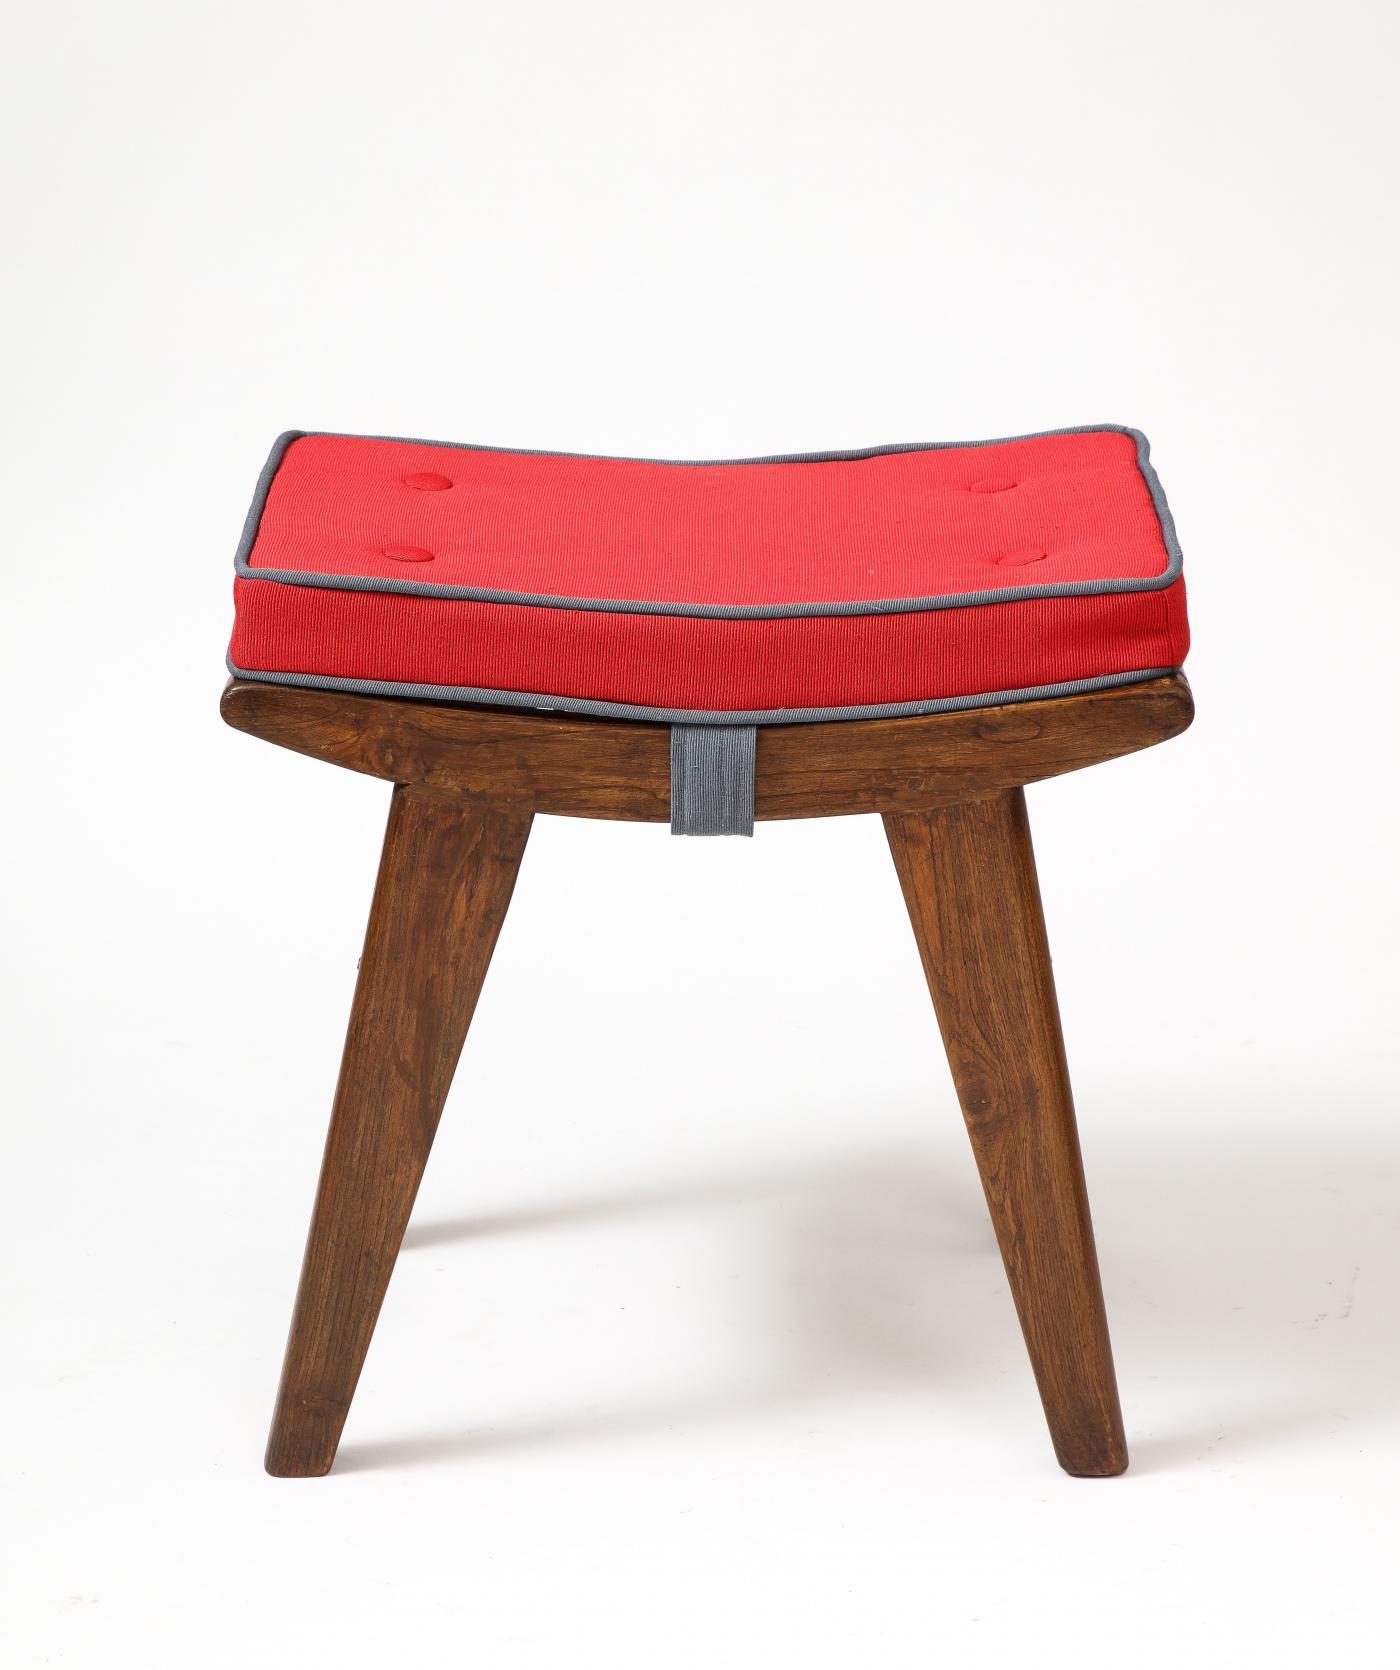 Stool in Teak, Cane and Upholstery by Pierre Jeanneret, Chandigarh, c. 1959 For Sale 1